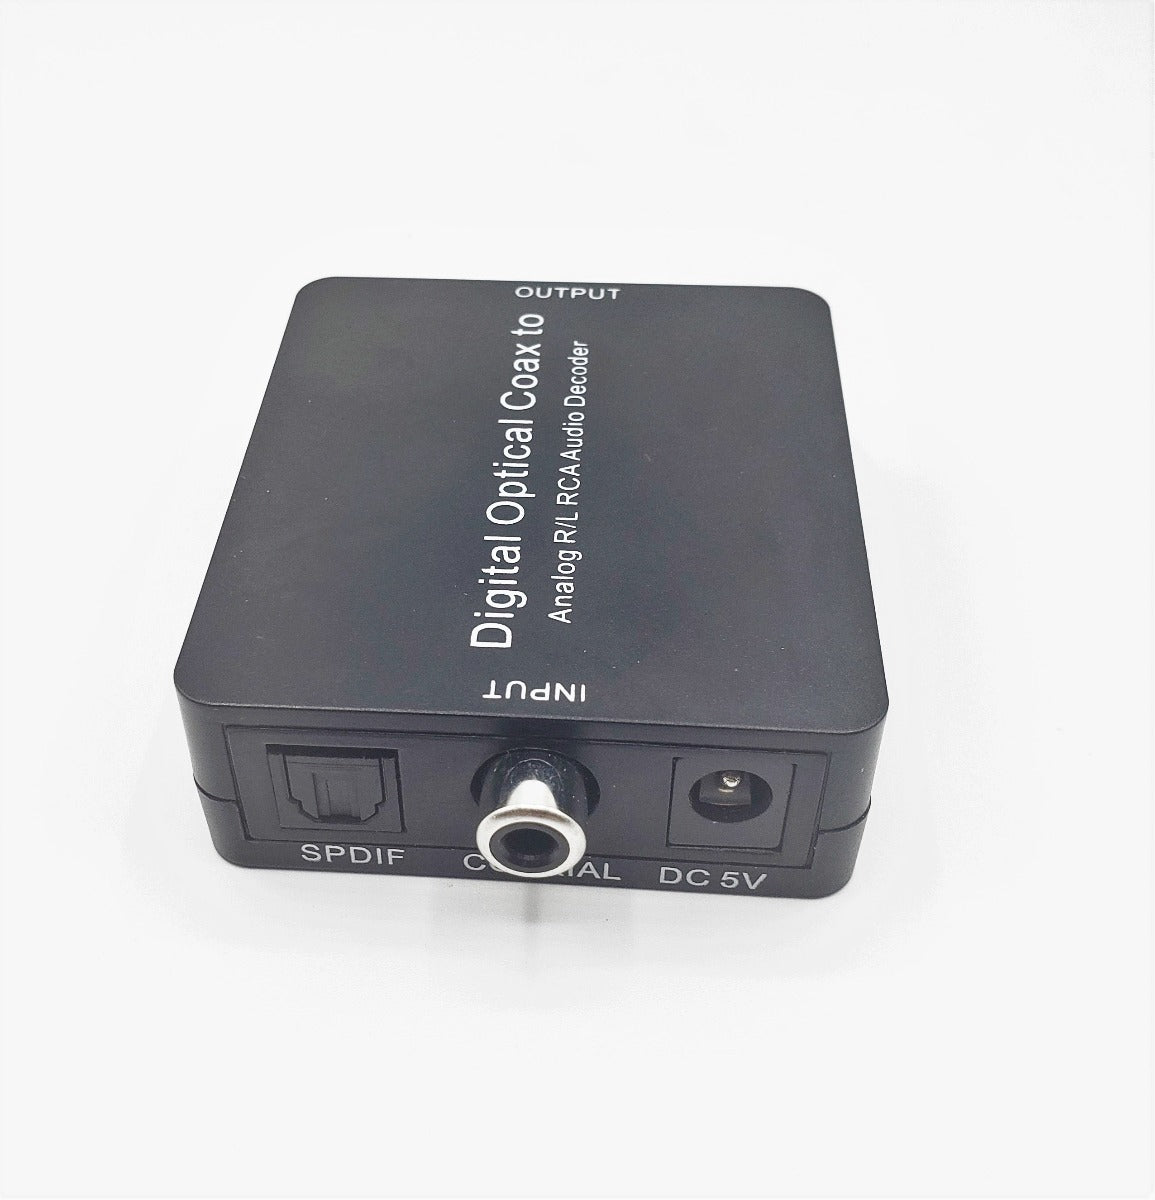 Optical or coaxial Dolby Digital audio converter